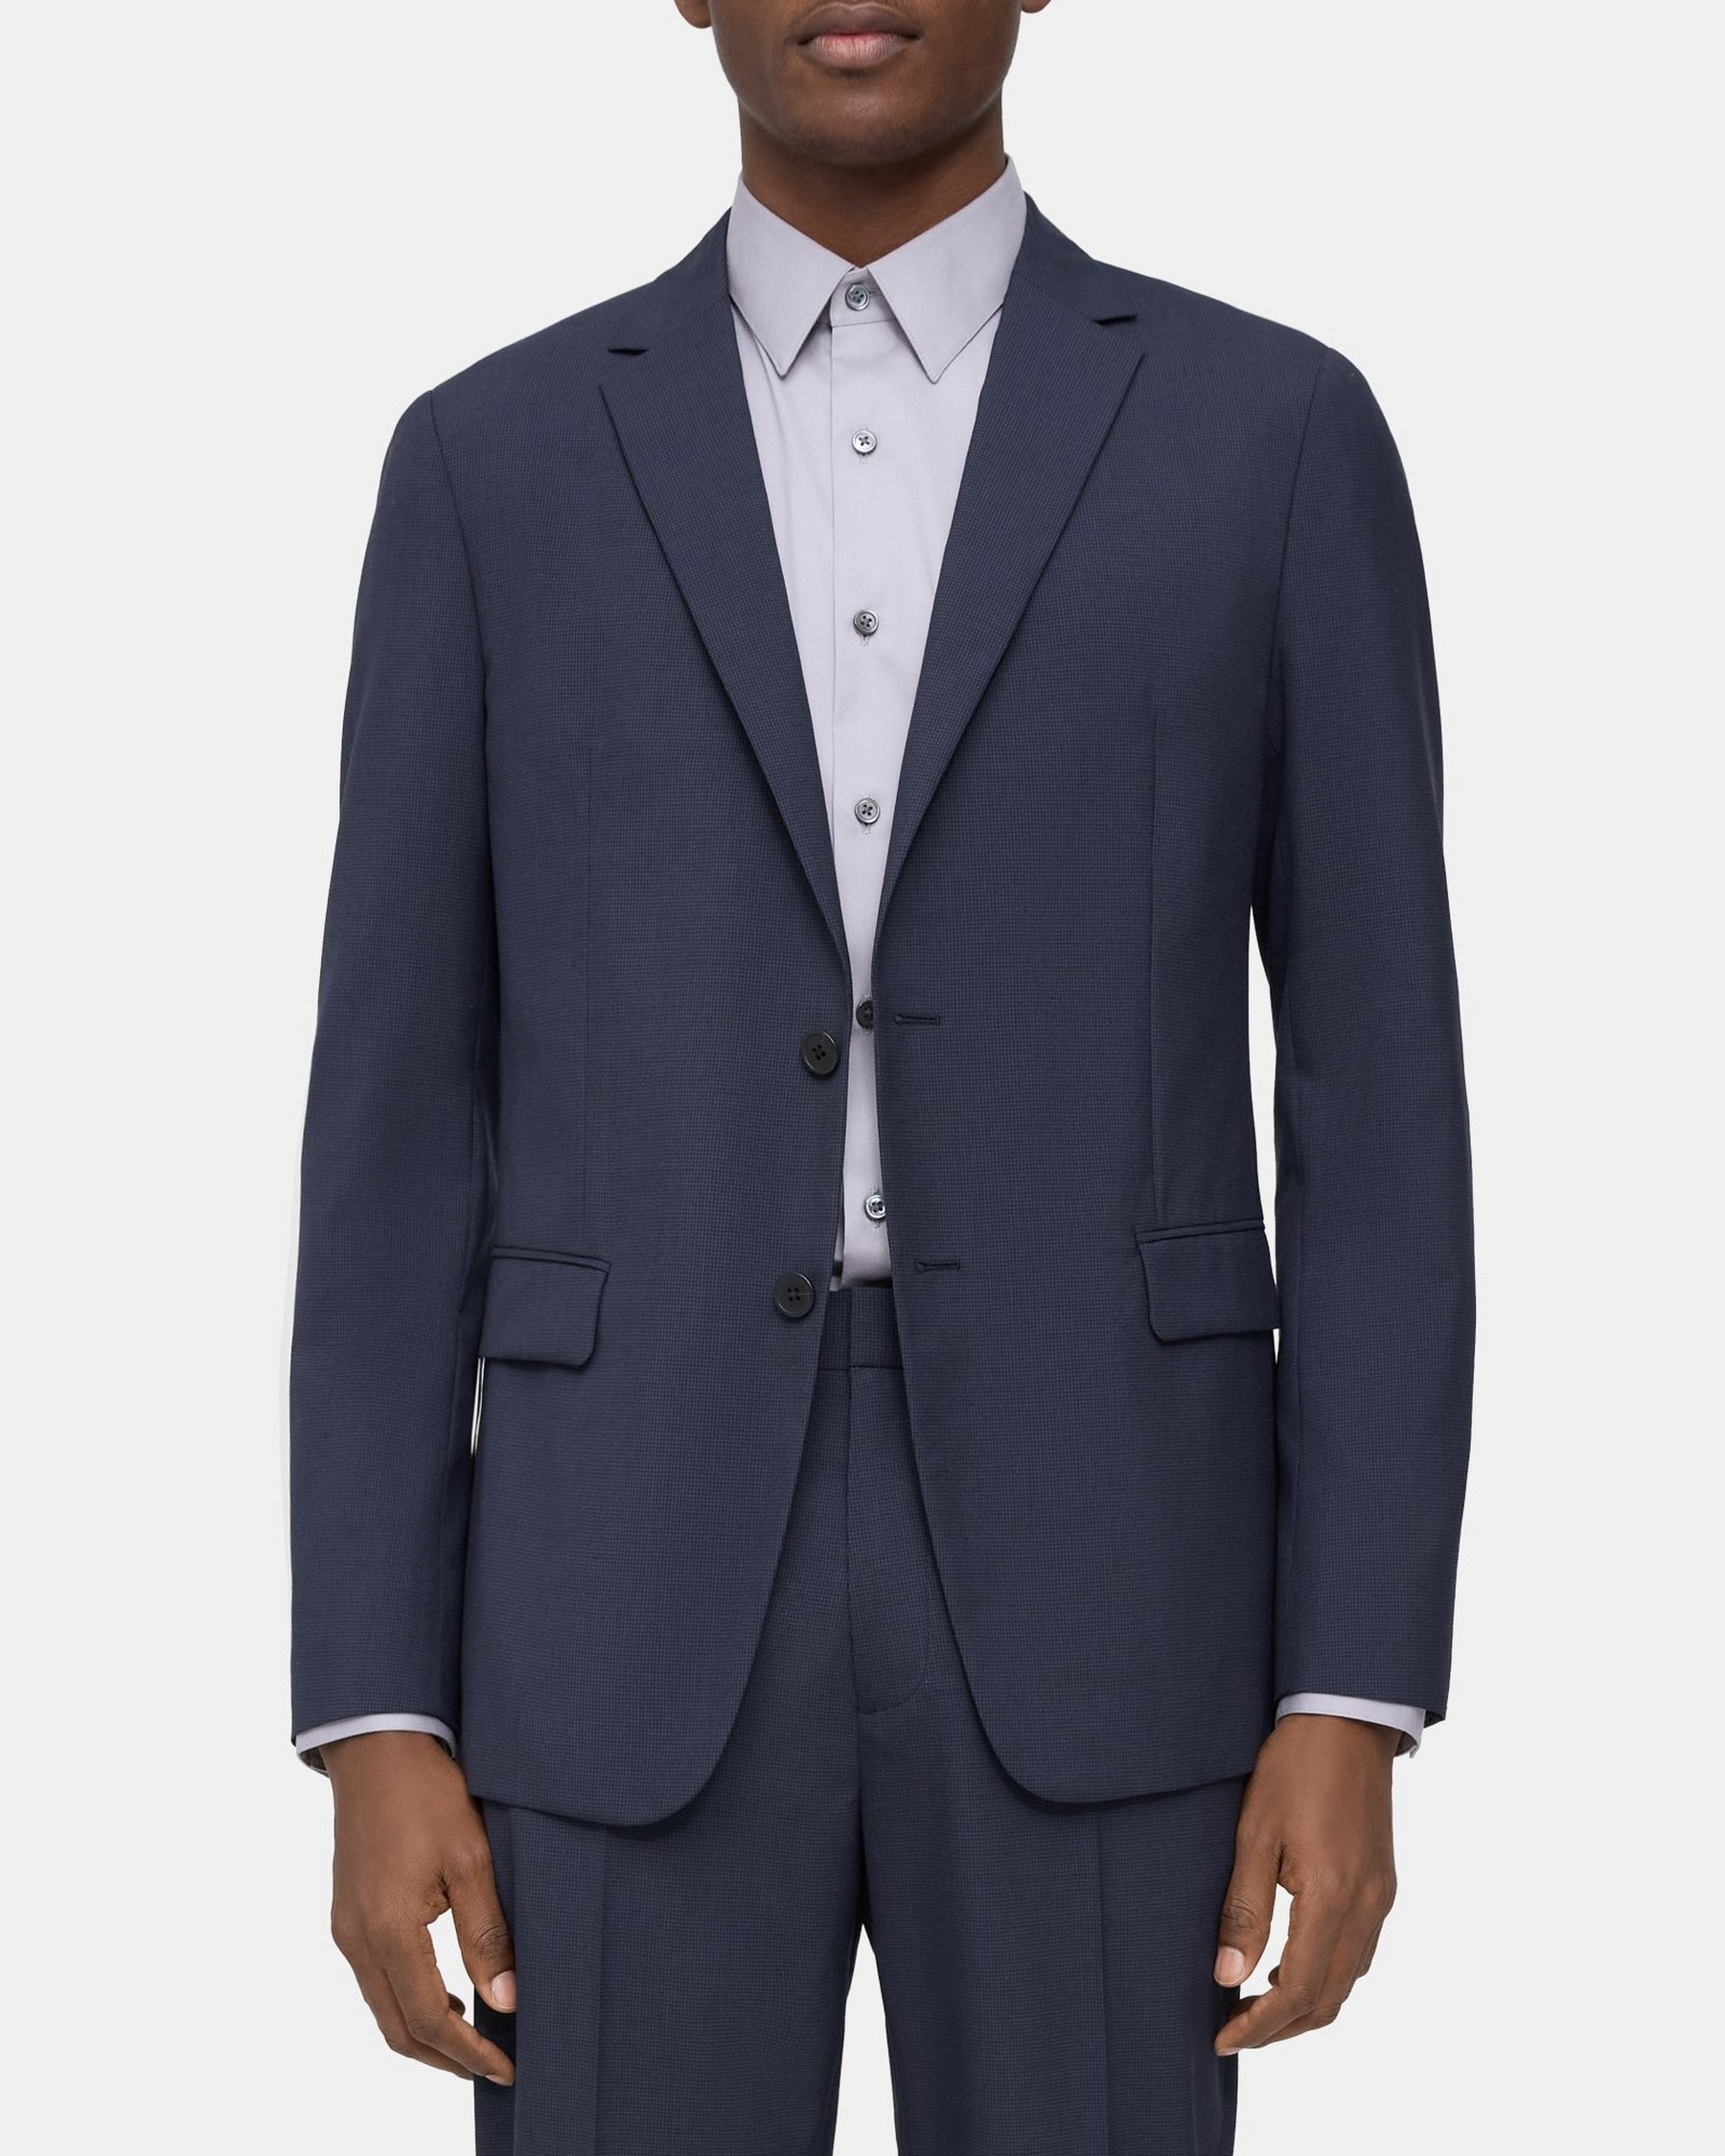 Theory Unstructured Suit Jacket in Houndstooth Wool Blend